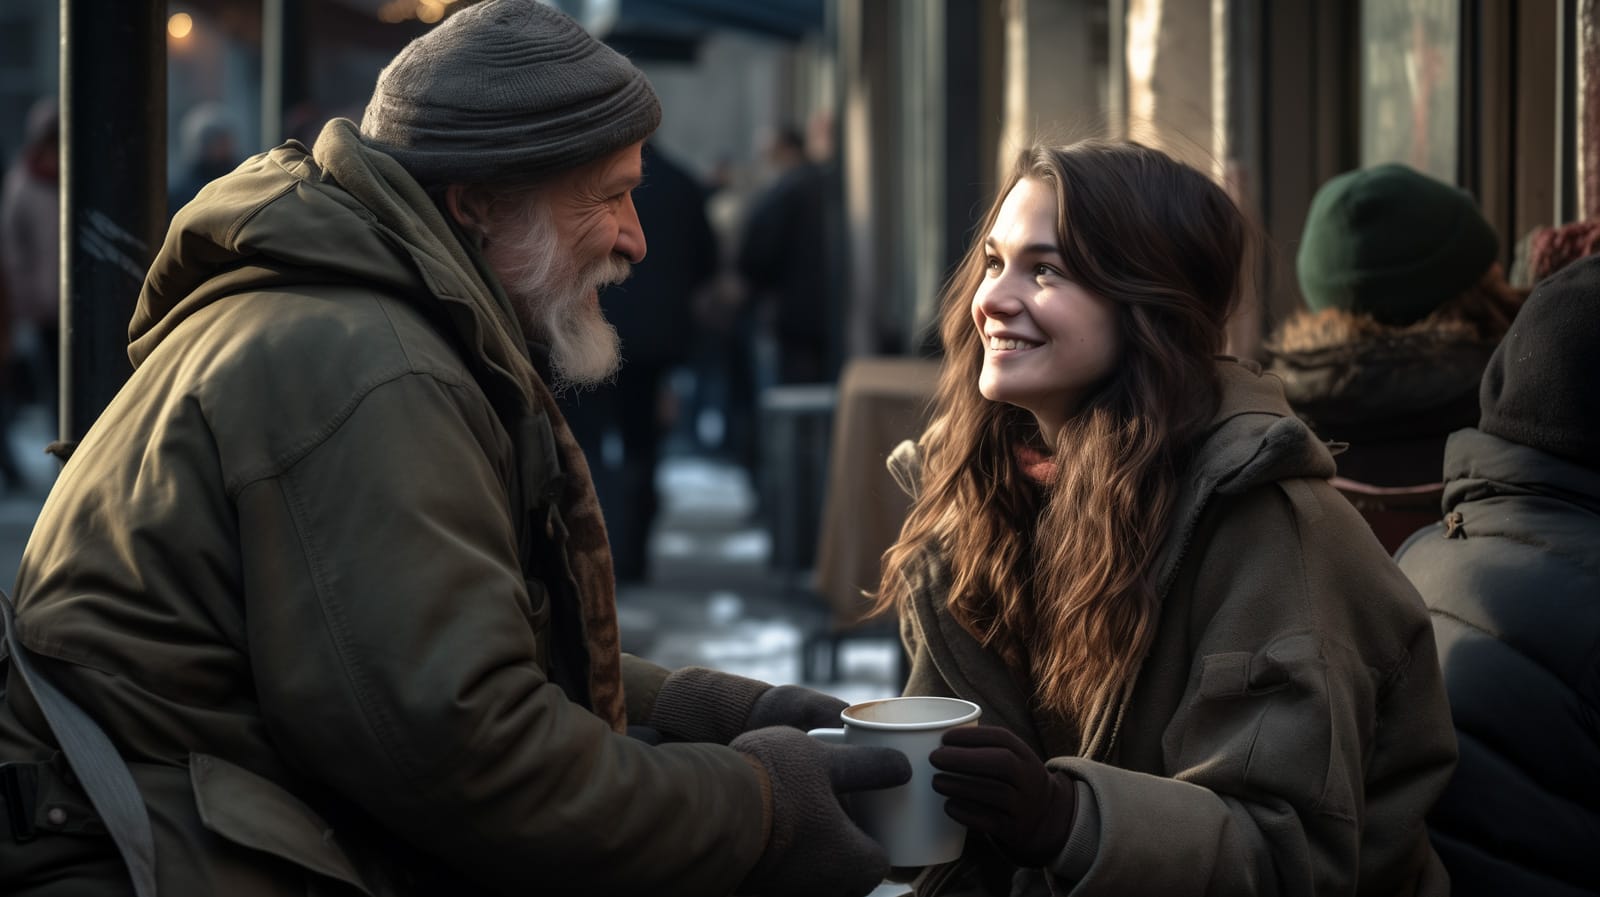 A picture of a girl handing a warm cup of coffee to a homeless guy showing compassion vs empathy